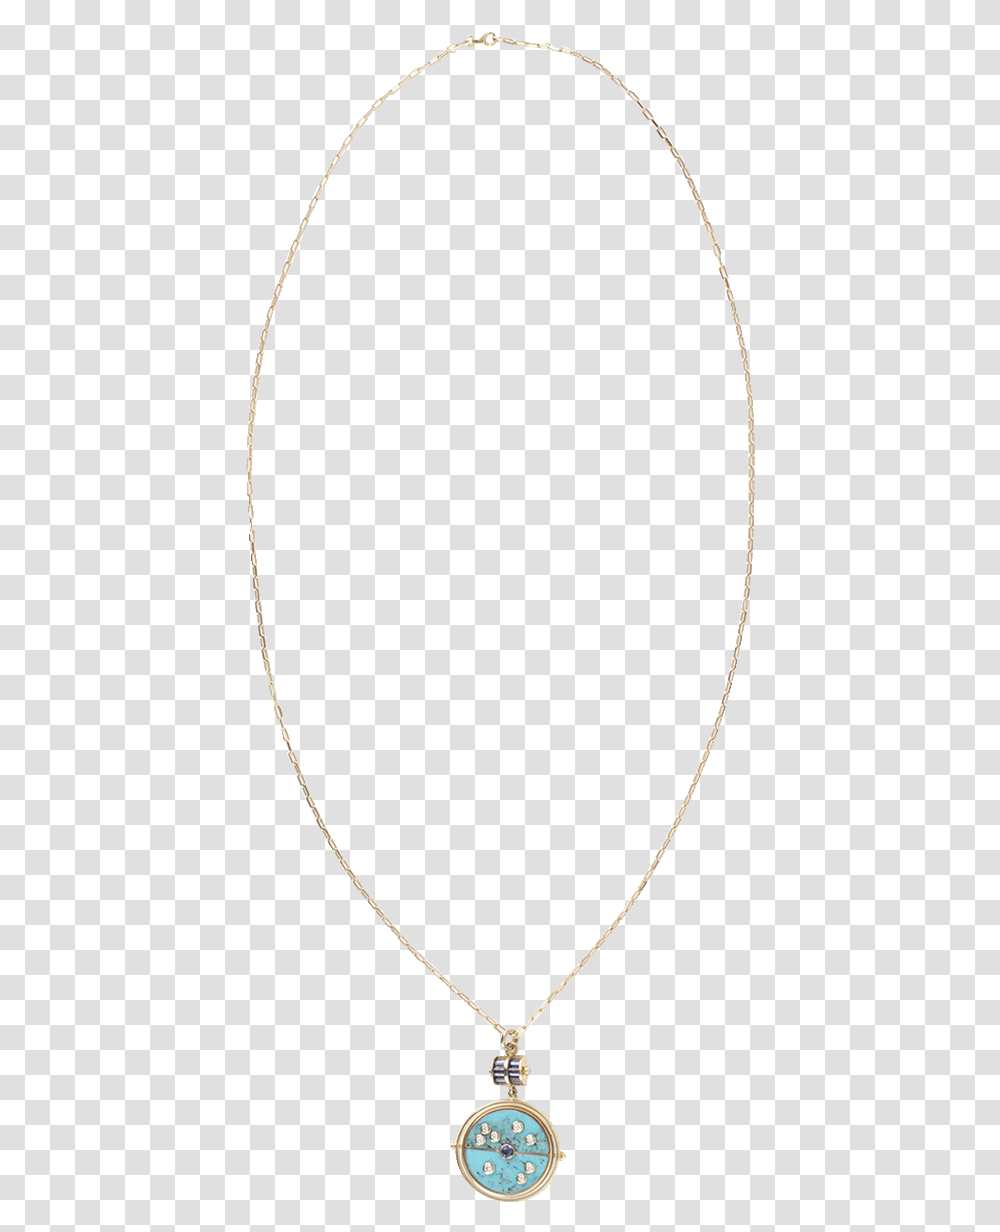 Locket, Armor, Shield, Necklace, Jewelry Transparent Png